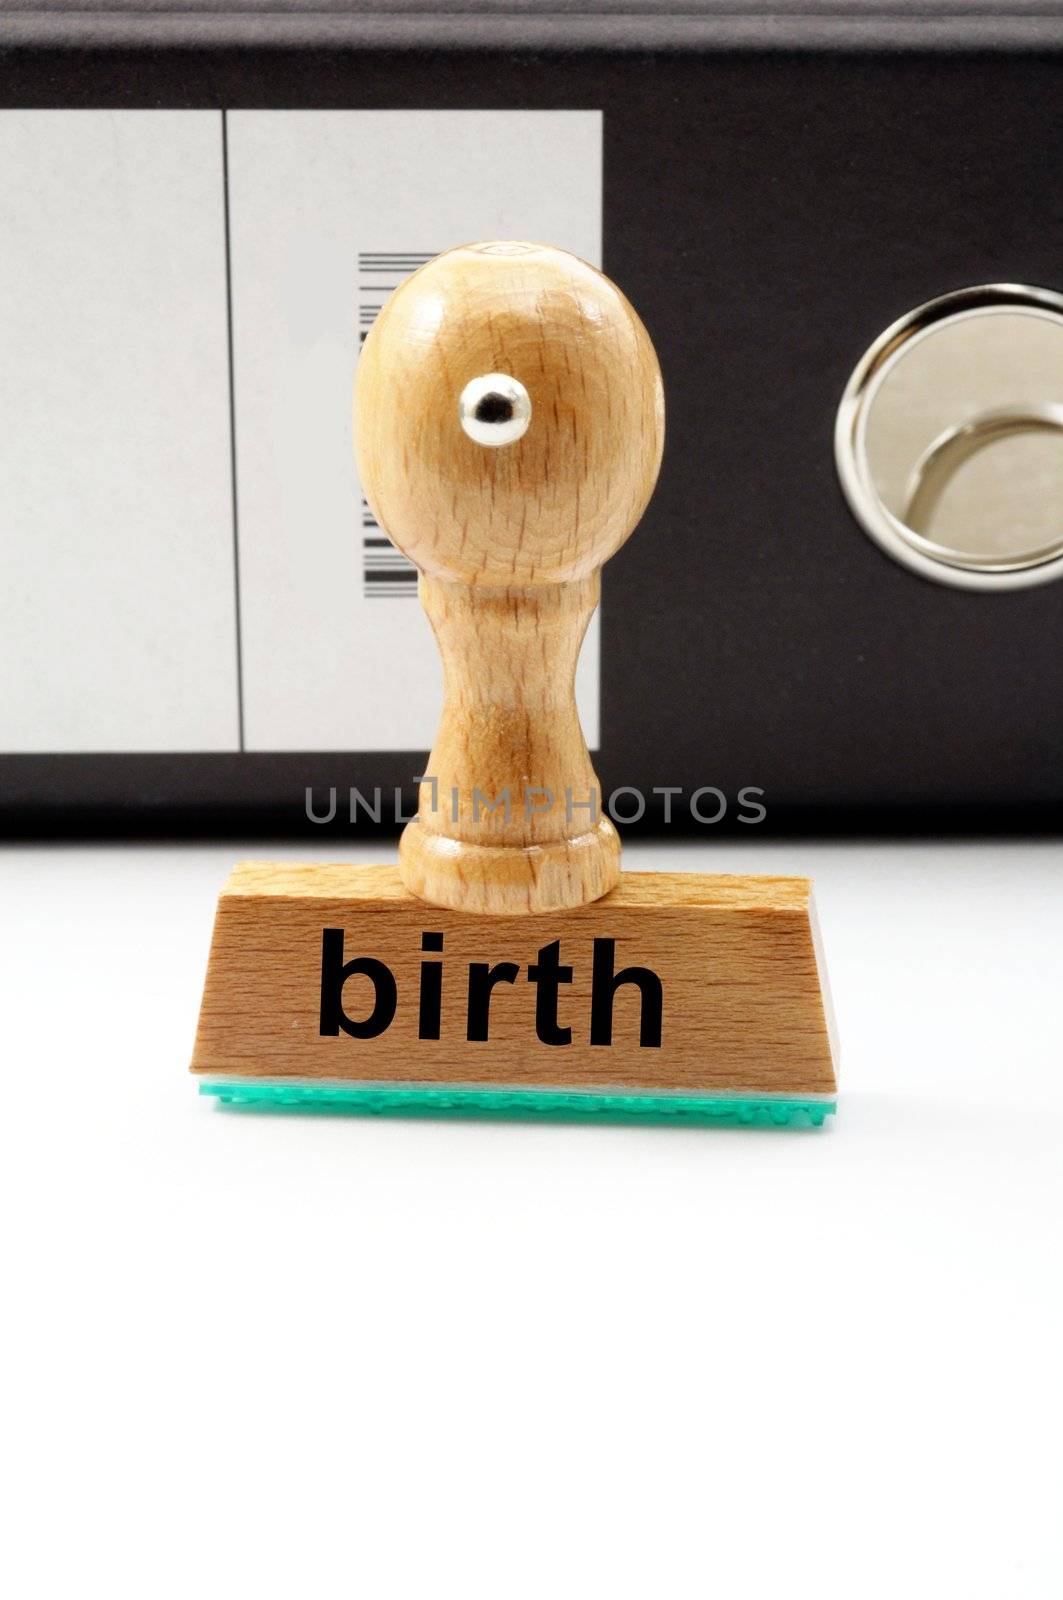 birth concept with stamp in hospital office and copyspace